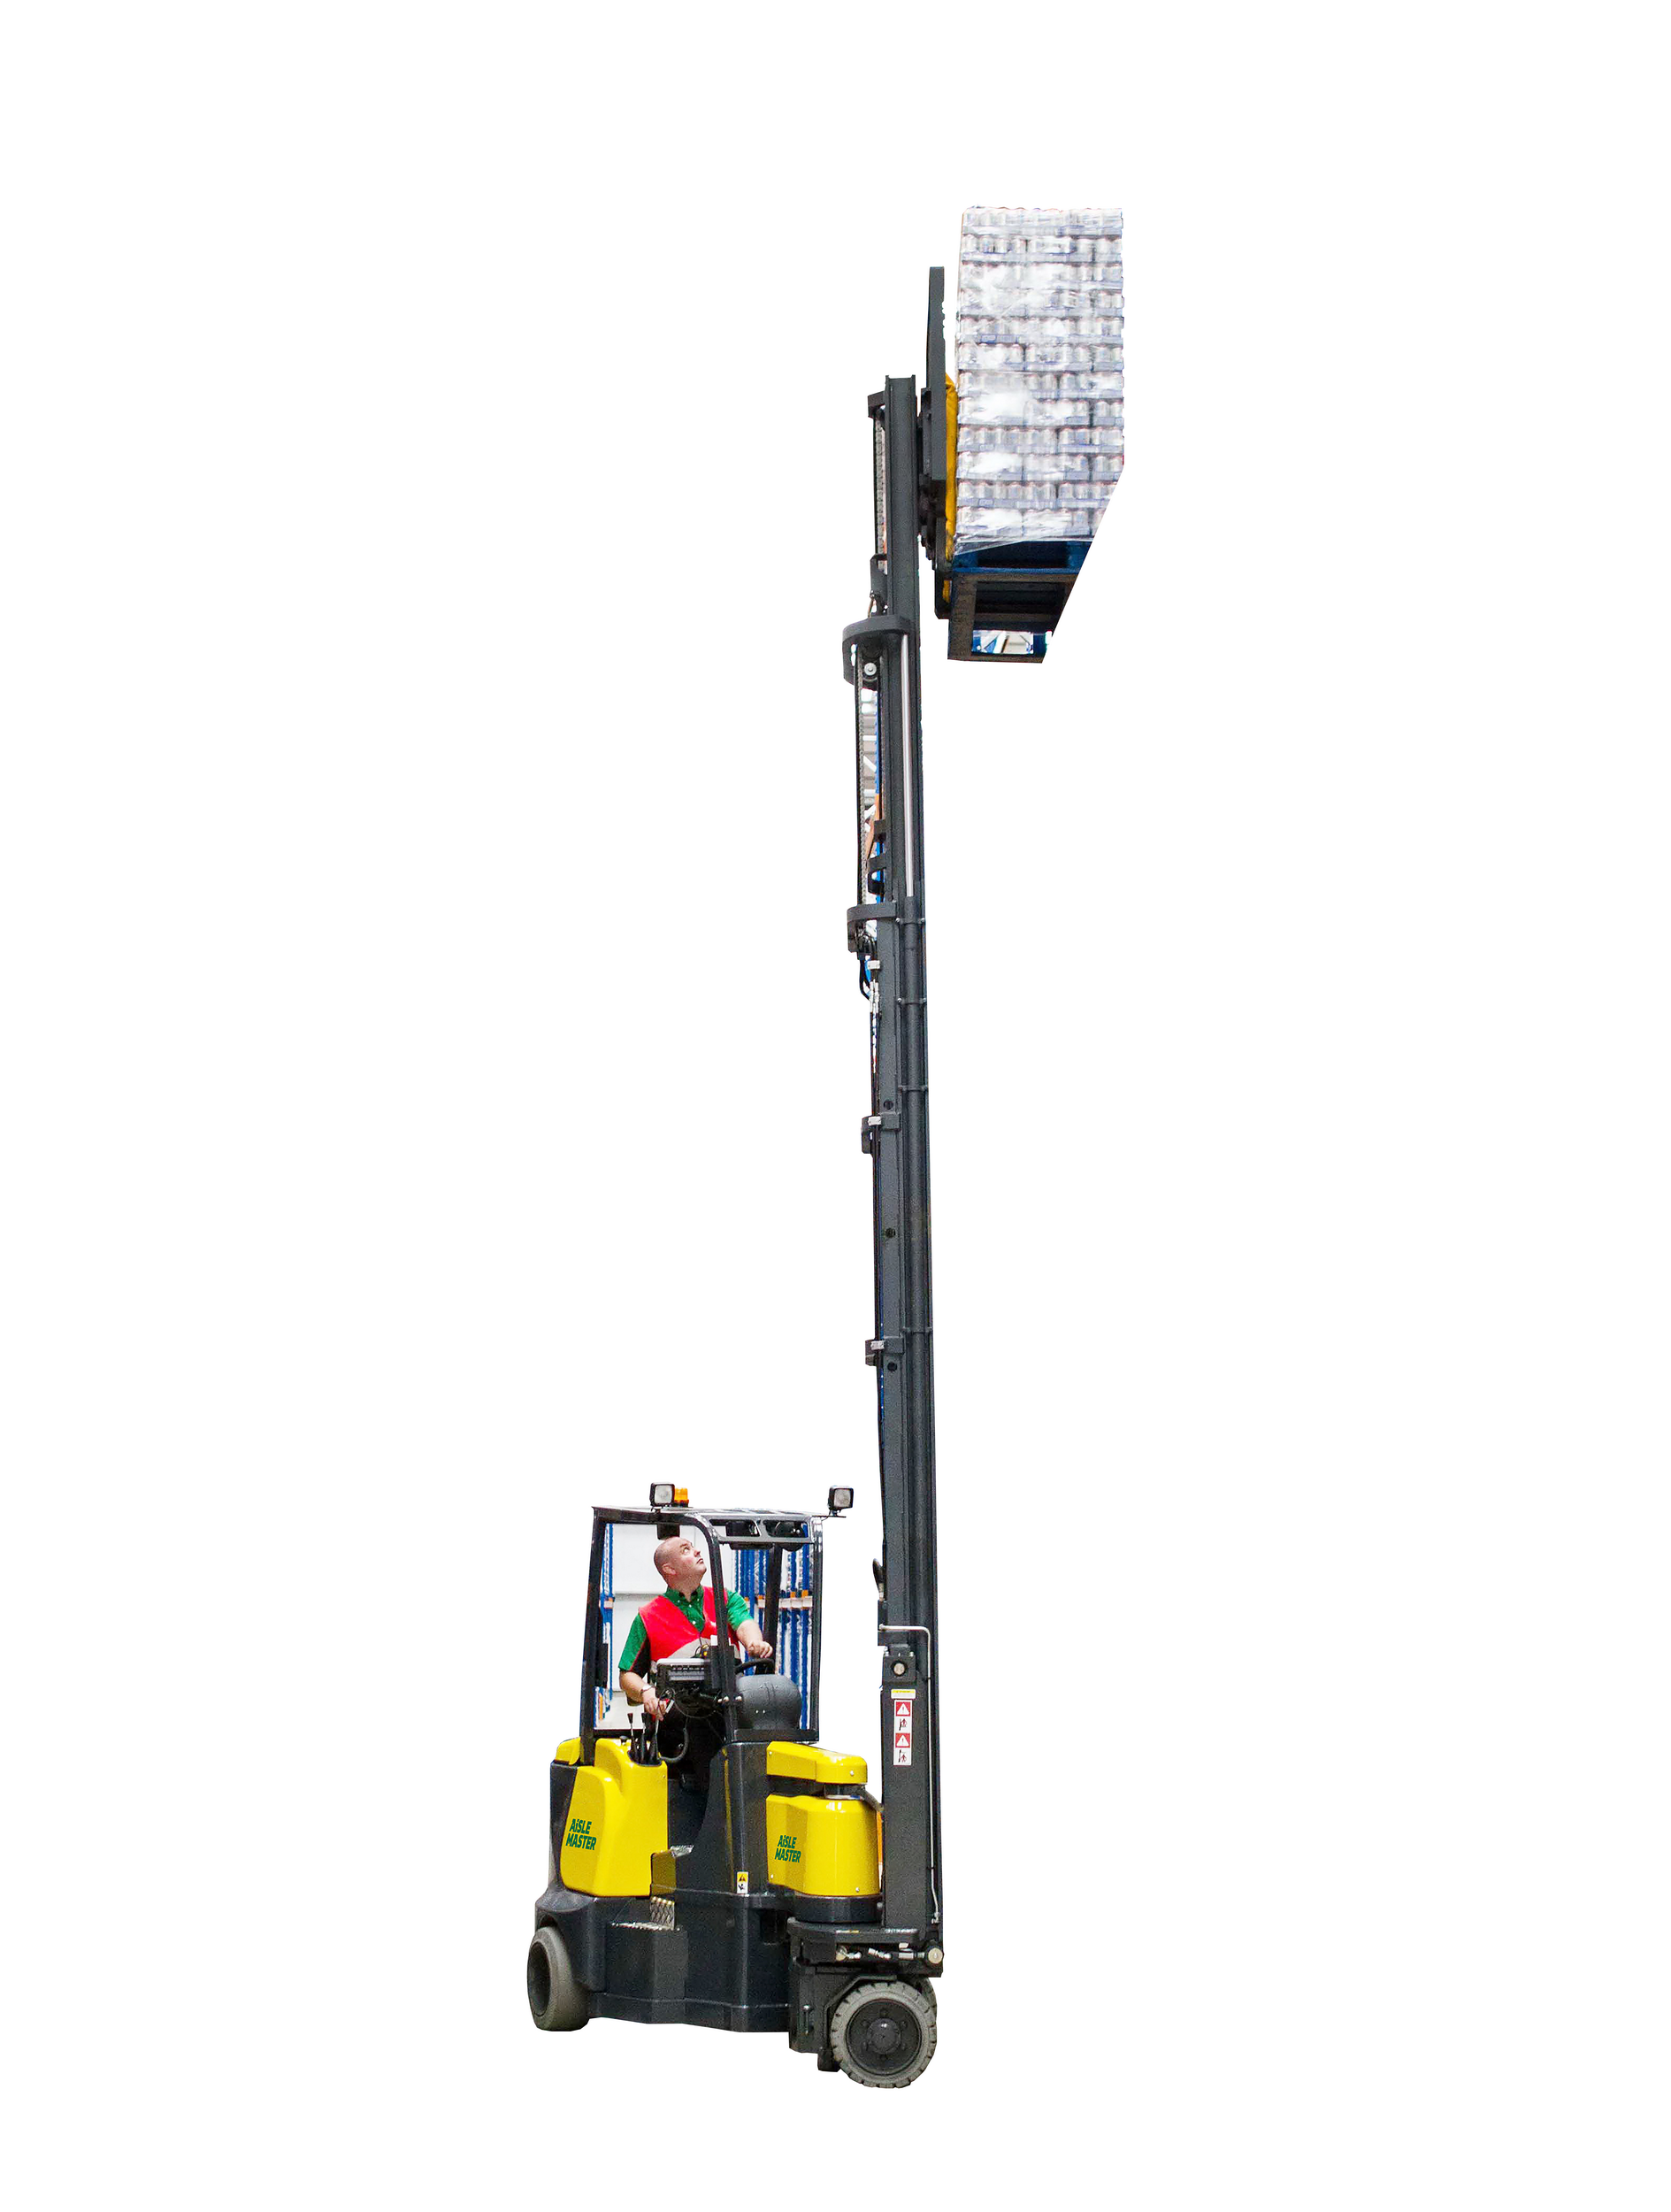 combilift Aisle Master Articulated Narrow Aisle Forklift Cut Out Image (2) Resize